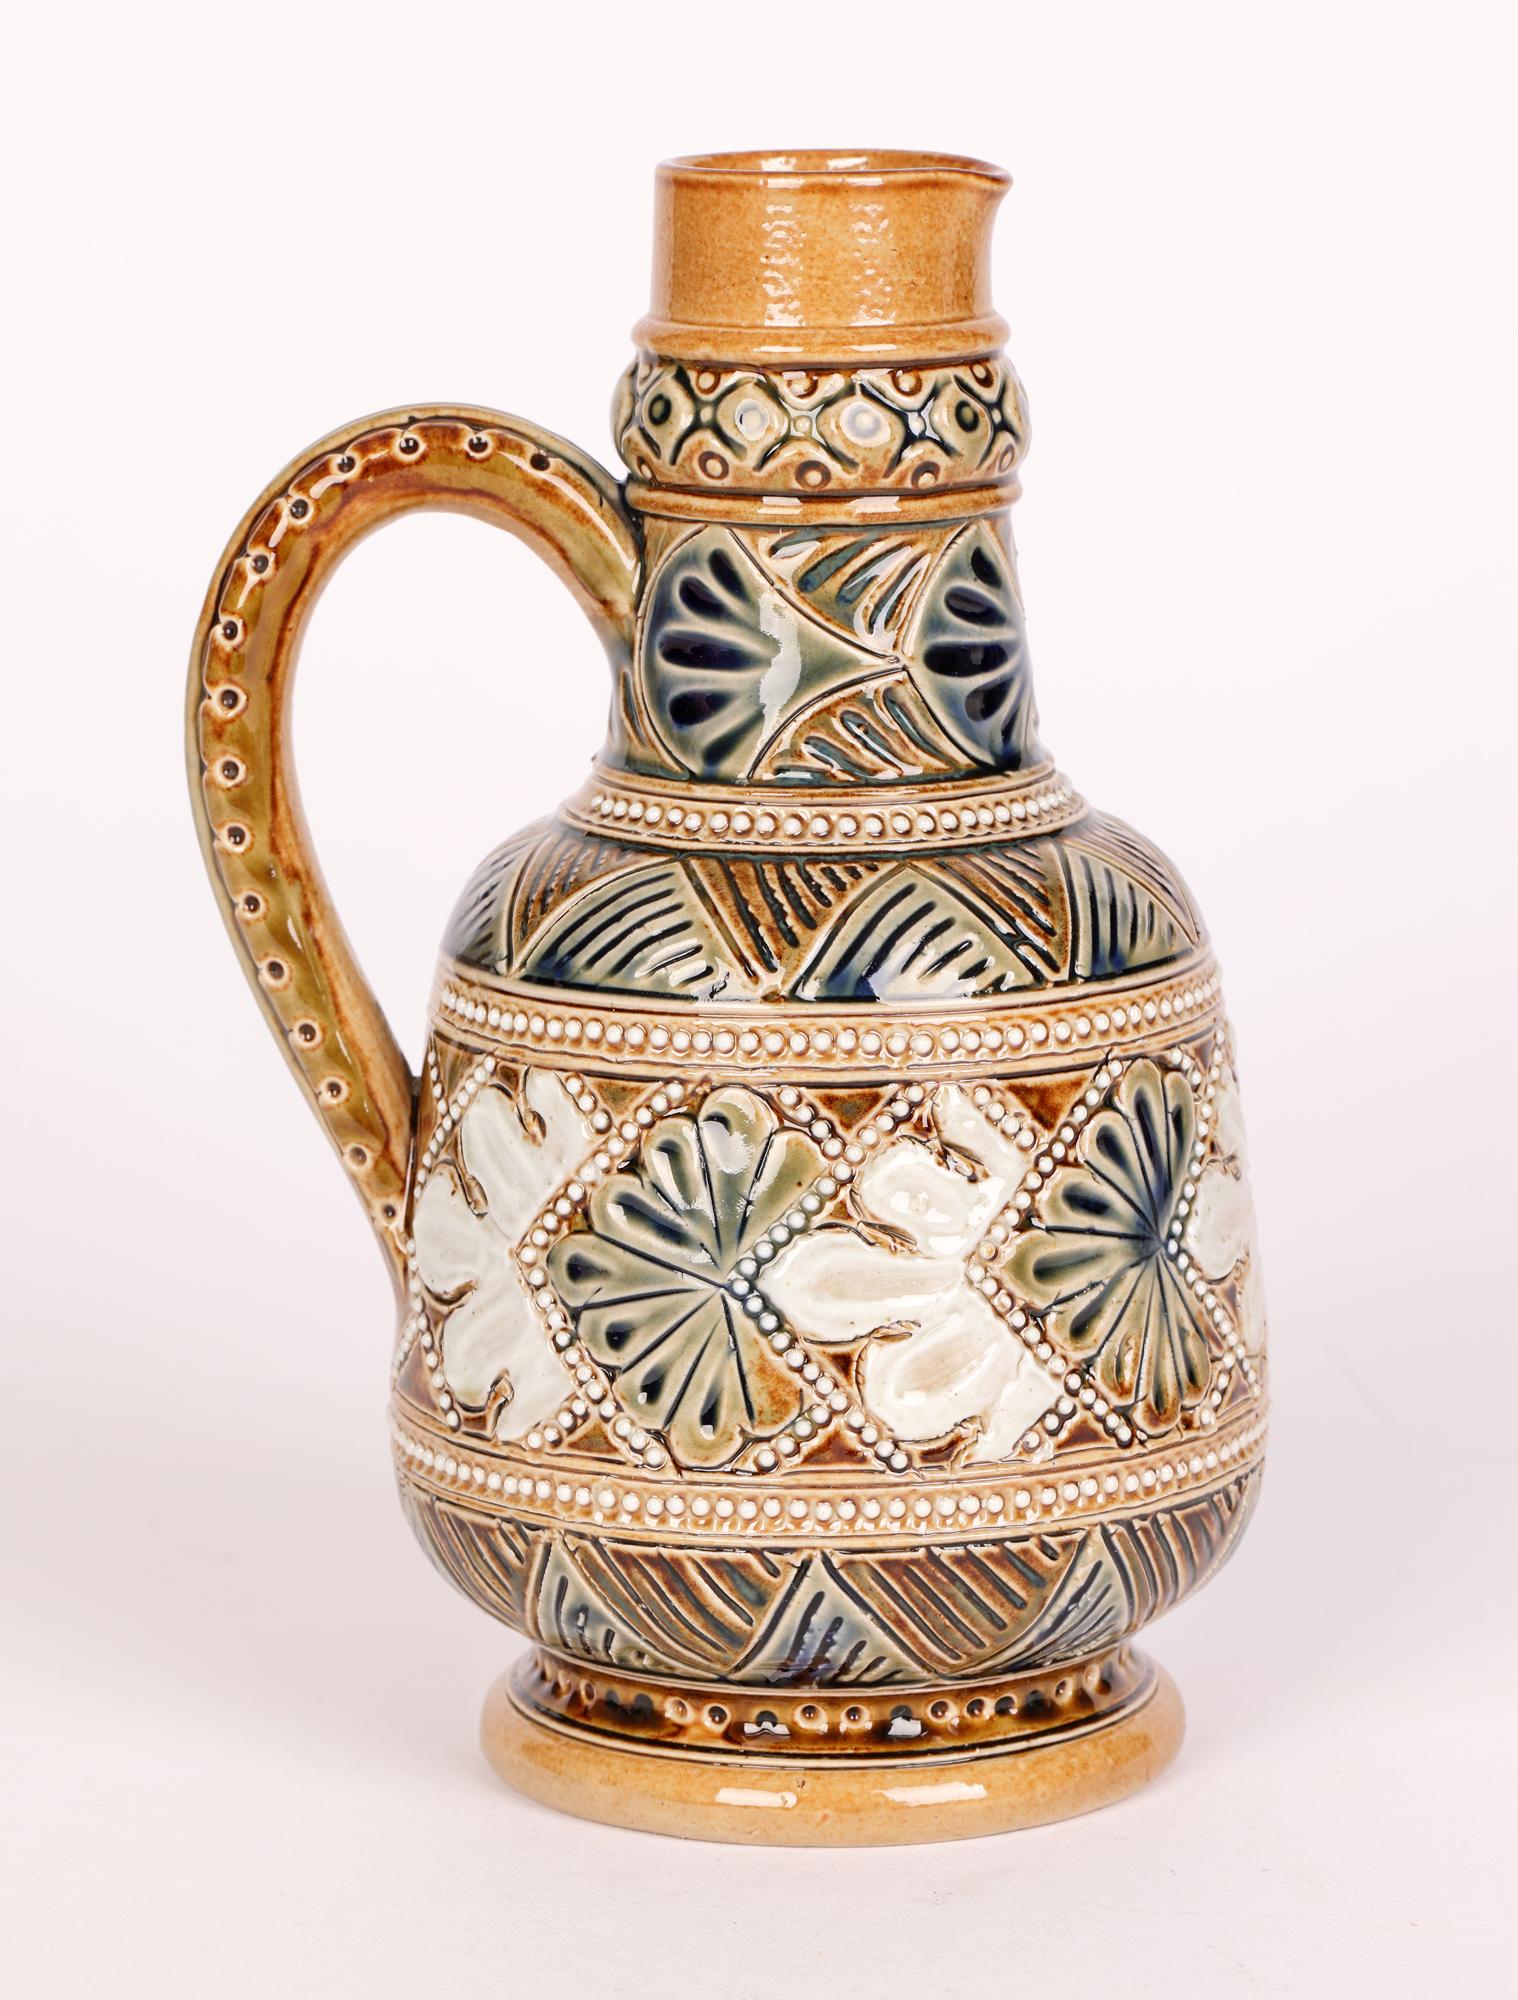 Doulton Lambeth Stoneware Ewer with Stylized Leaf Motifs by Edith Lupton For Sale 8